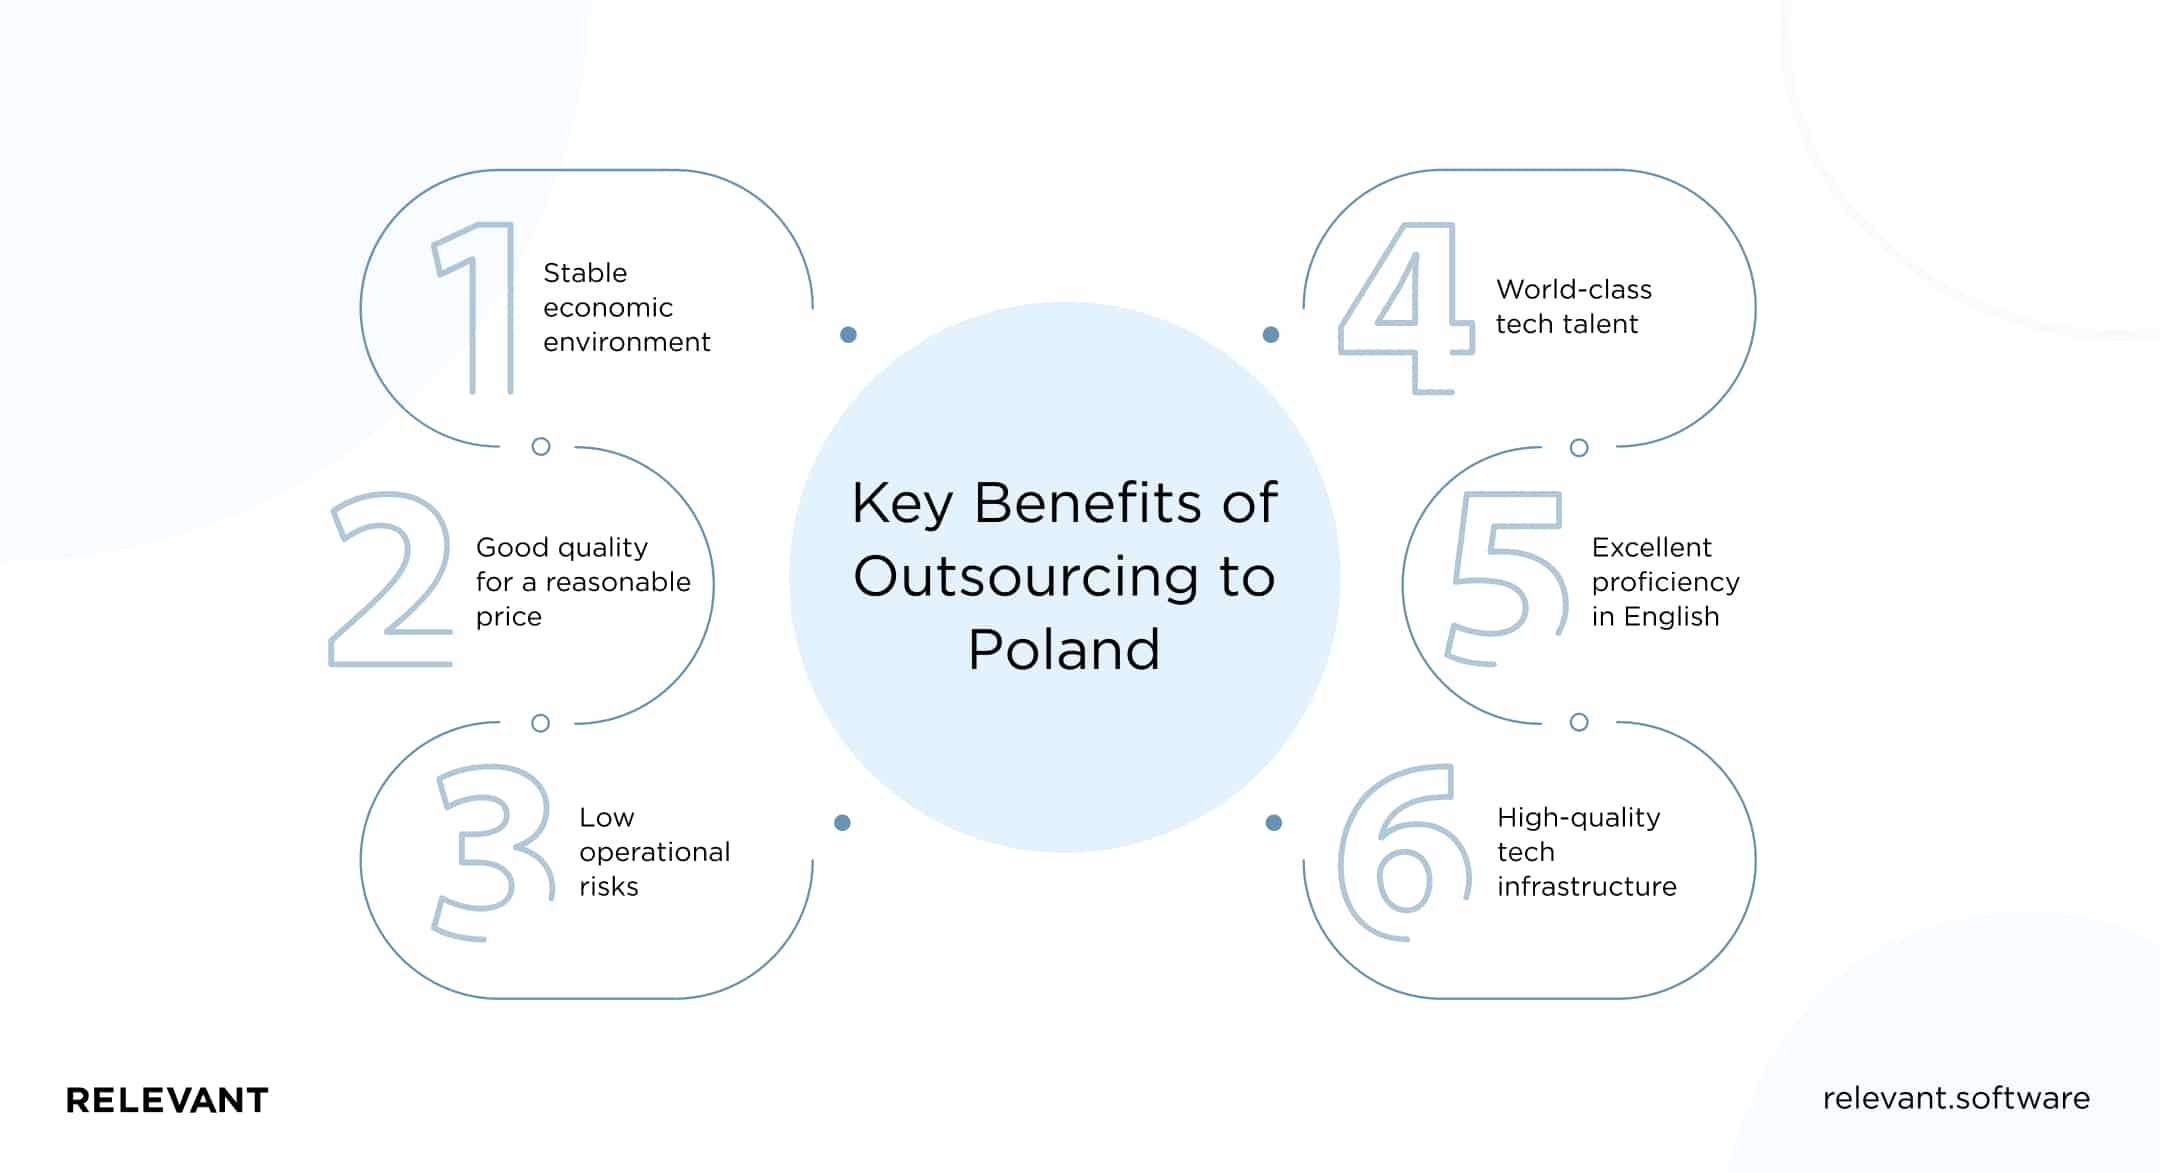 Key Benefits of Outsourcing to Poland